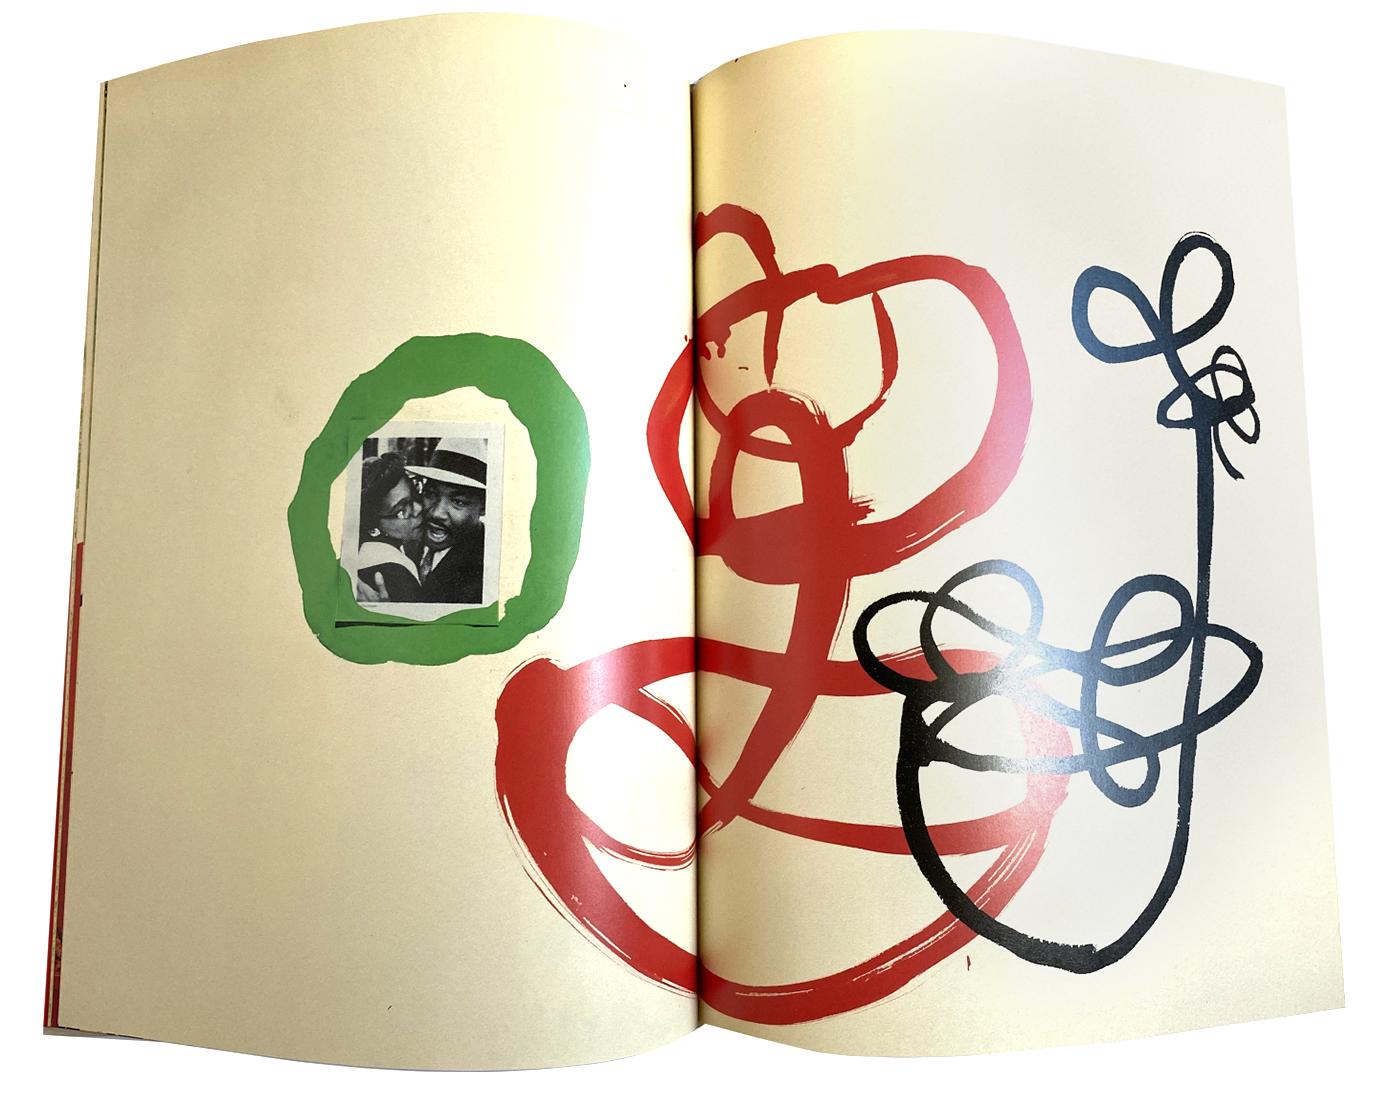 Eight Ball by Keith Haring:
Superbly rendered 1989 Keith Haring monograph featuring standout collage-based imagery by the legendary New York artist. Beautiful bright colors throughout. 

Hardcover artist book; 46 pages; 1st edition 1989. 
12.25